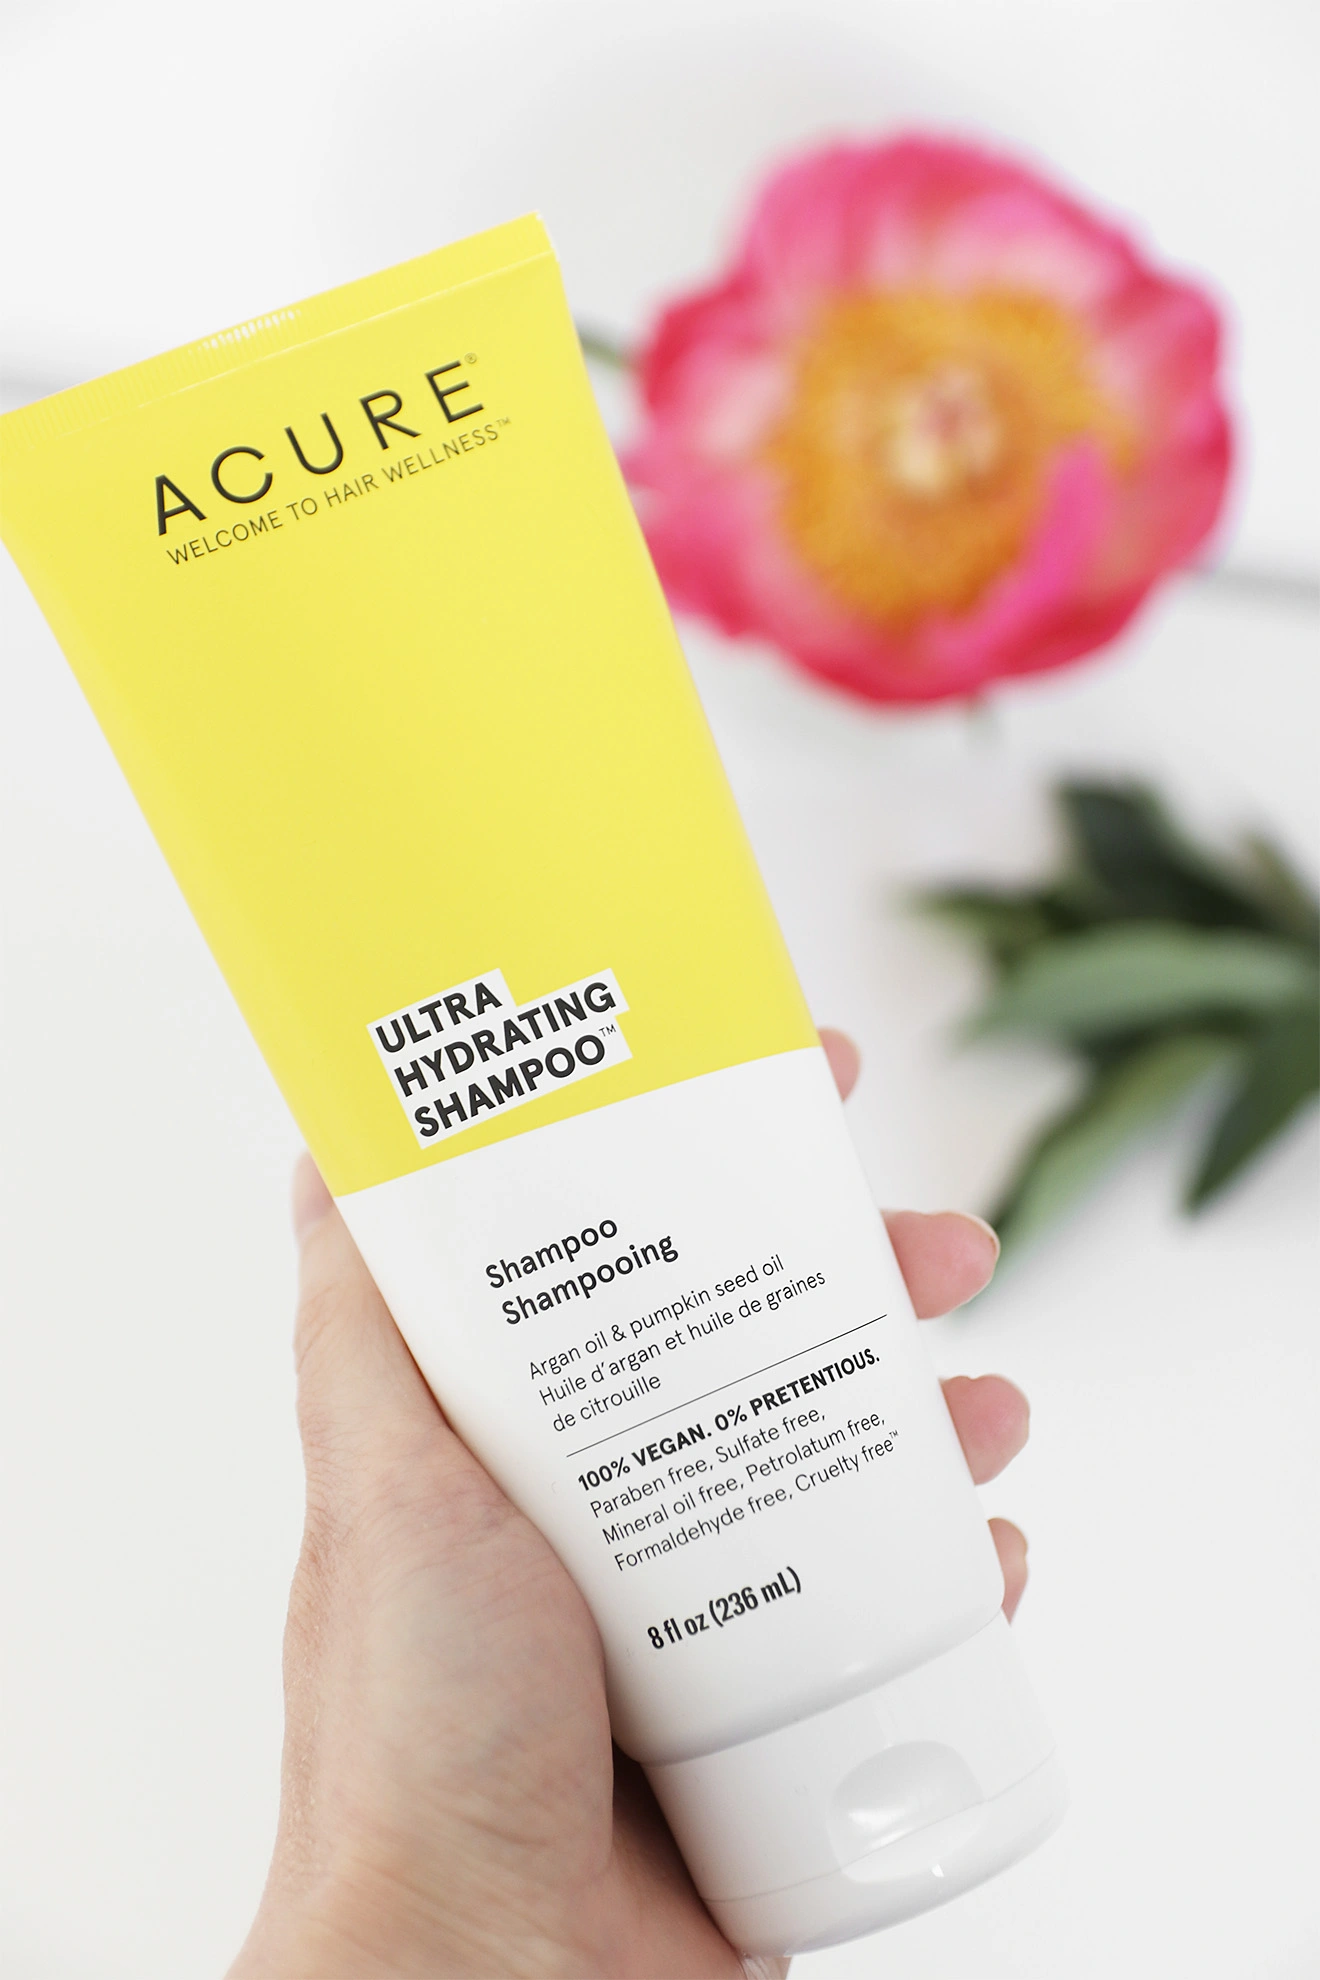 Acure Clean Ultra Hydrating shampoo